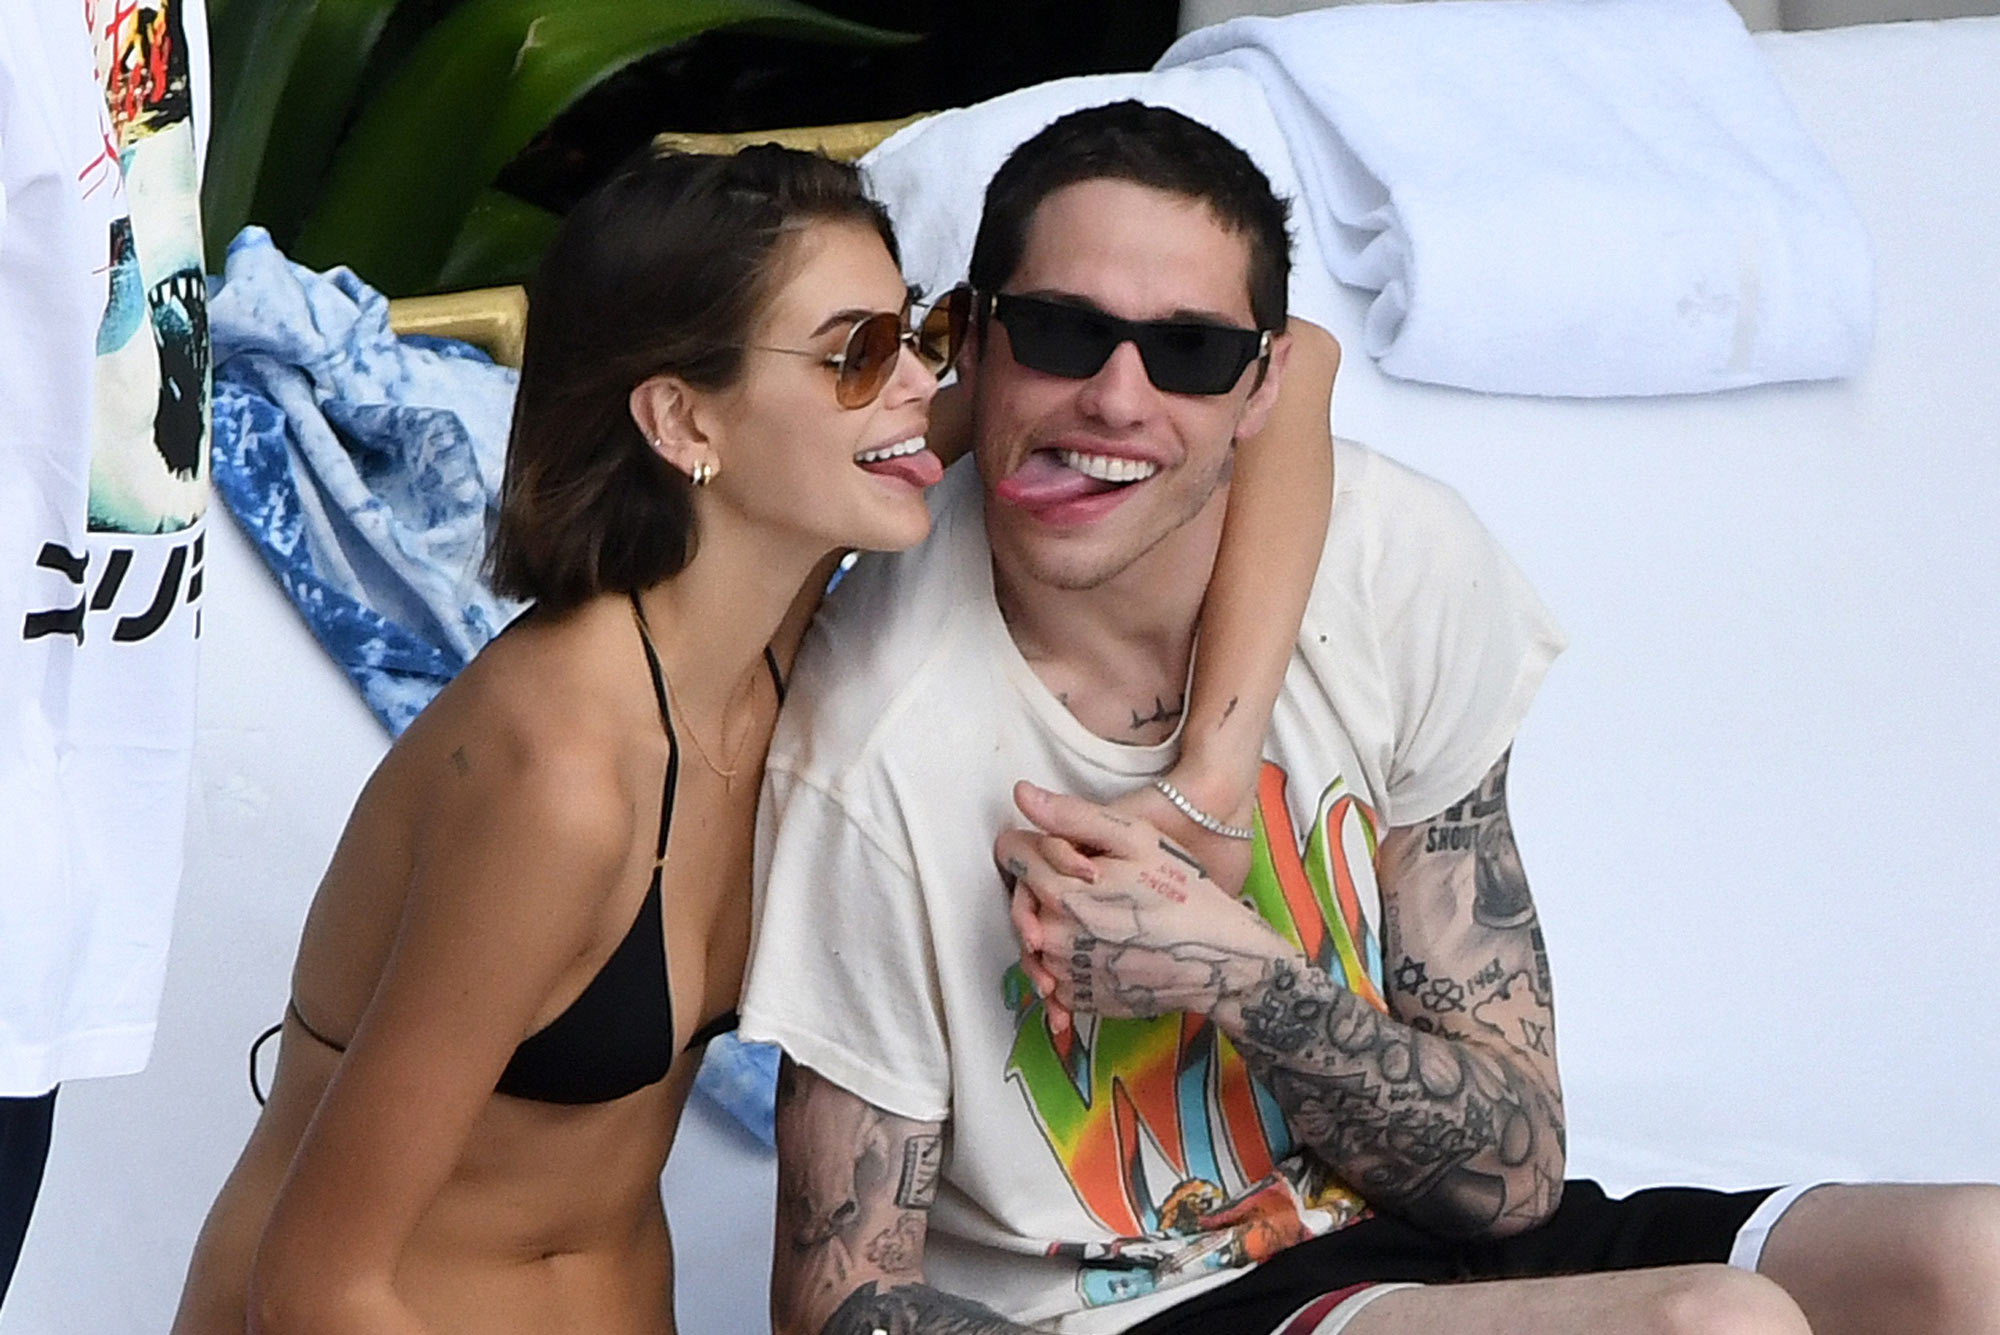 Pete Davidson's dating history: His girlfriends and exes